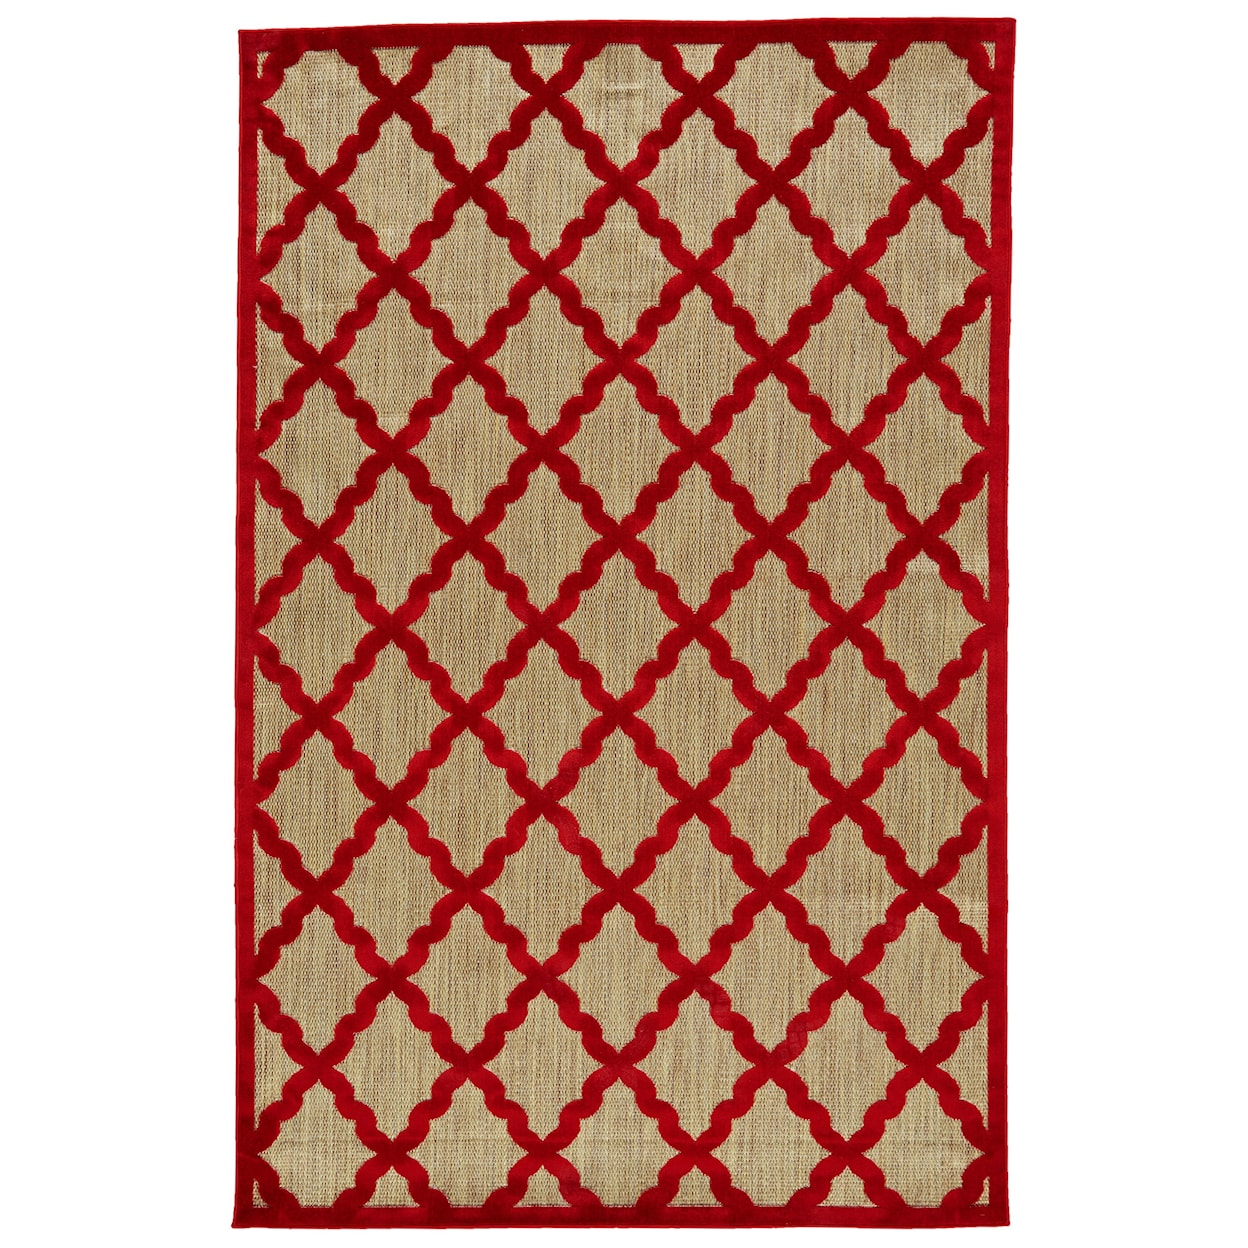 Feizy Rugs Raphia I Tan/Red 7'-6" X 10'-6" Area Rug